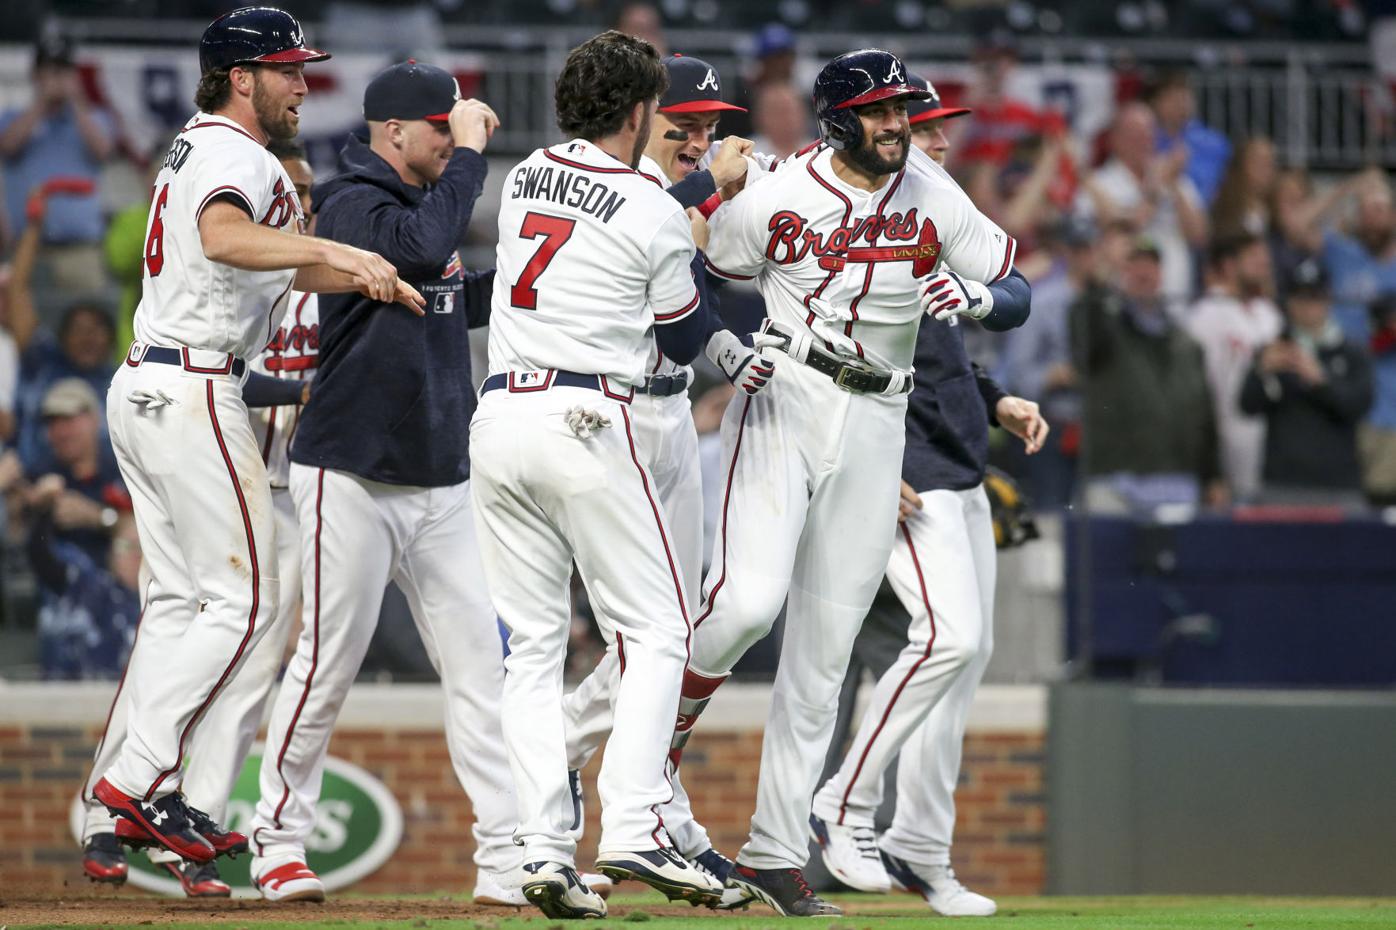 Culberson's heart shows on, off field